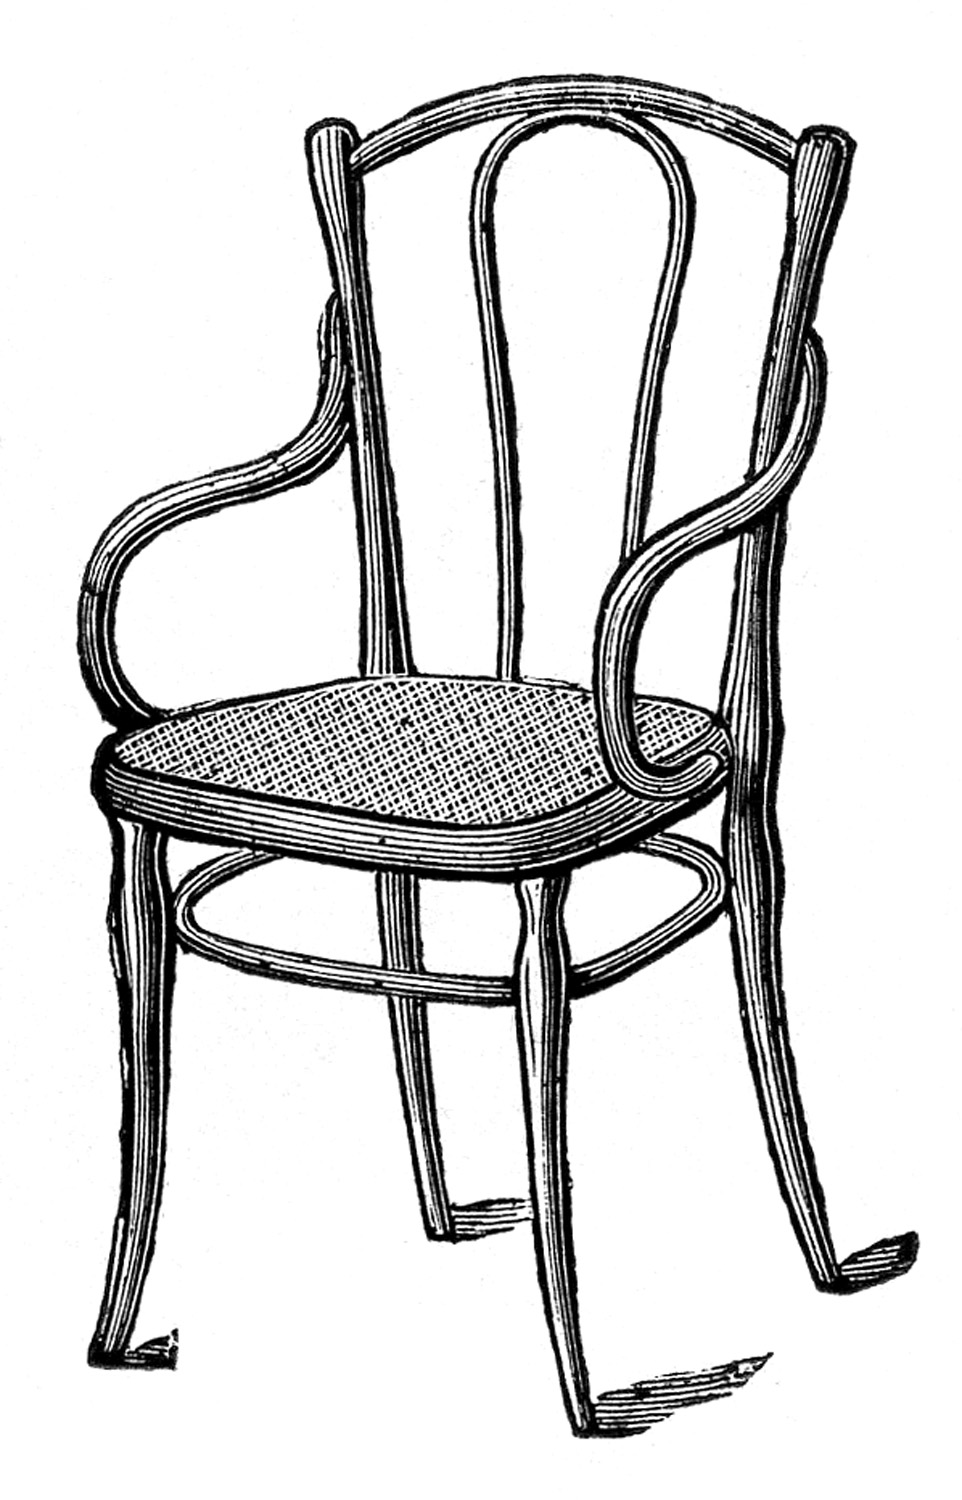 Antique Images   Caned Bentwood Chairs   The Graphics Fairy